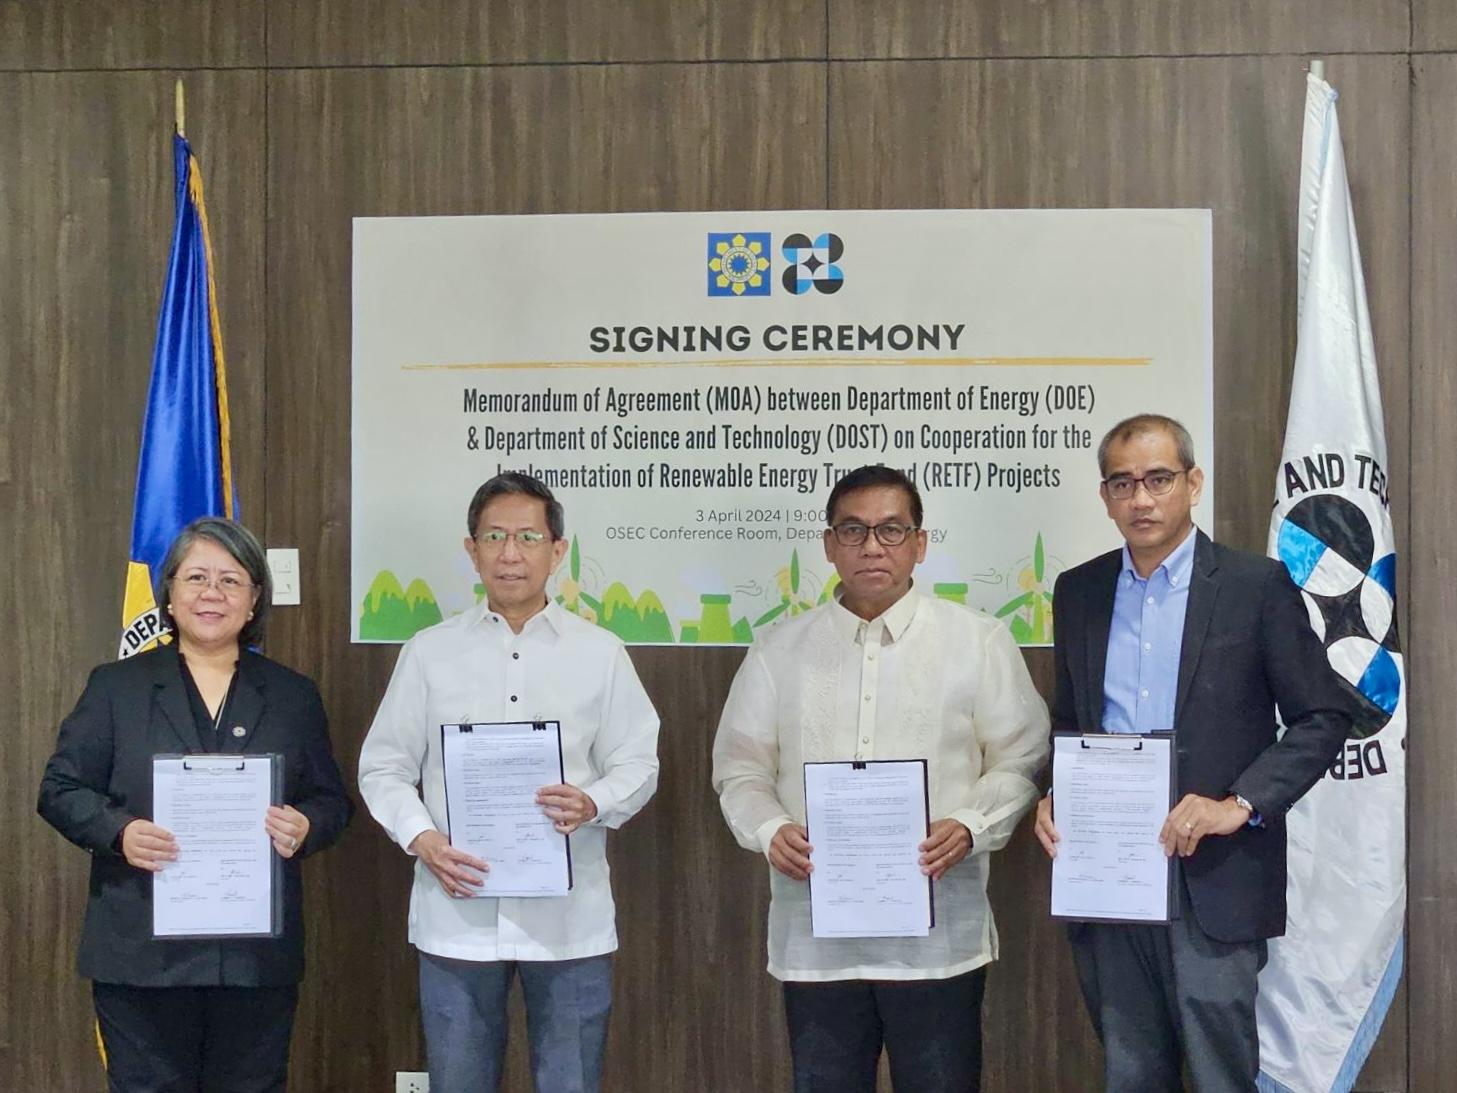 DOST and DOE Forge Partnership to expedite the implementation of the Renewable Energy Trust Fund (RETF) Projects image